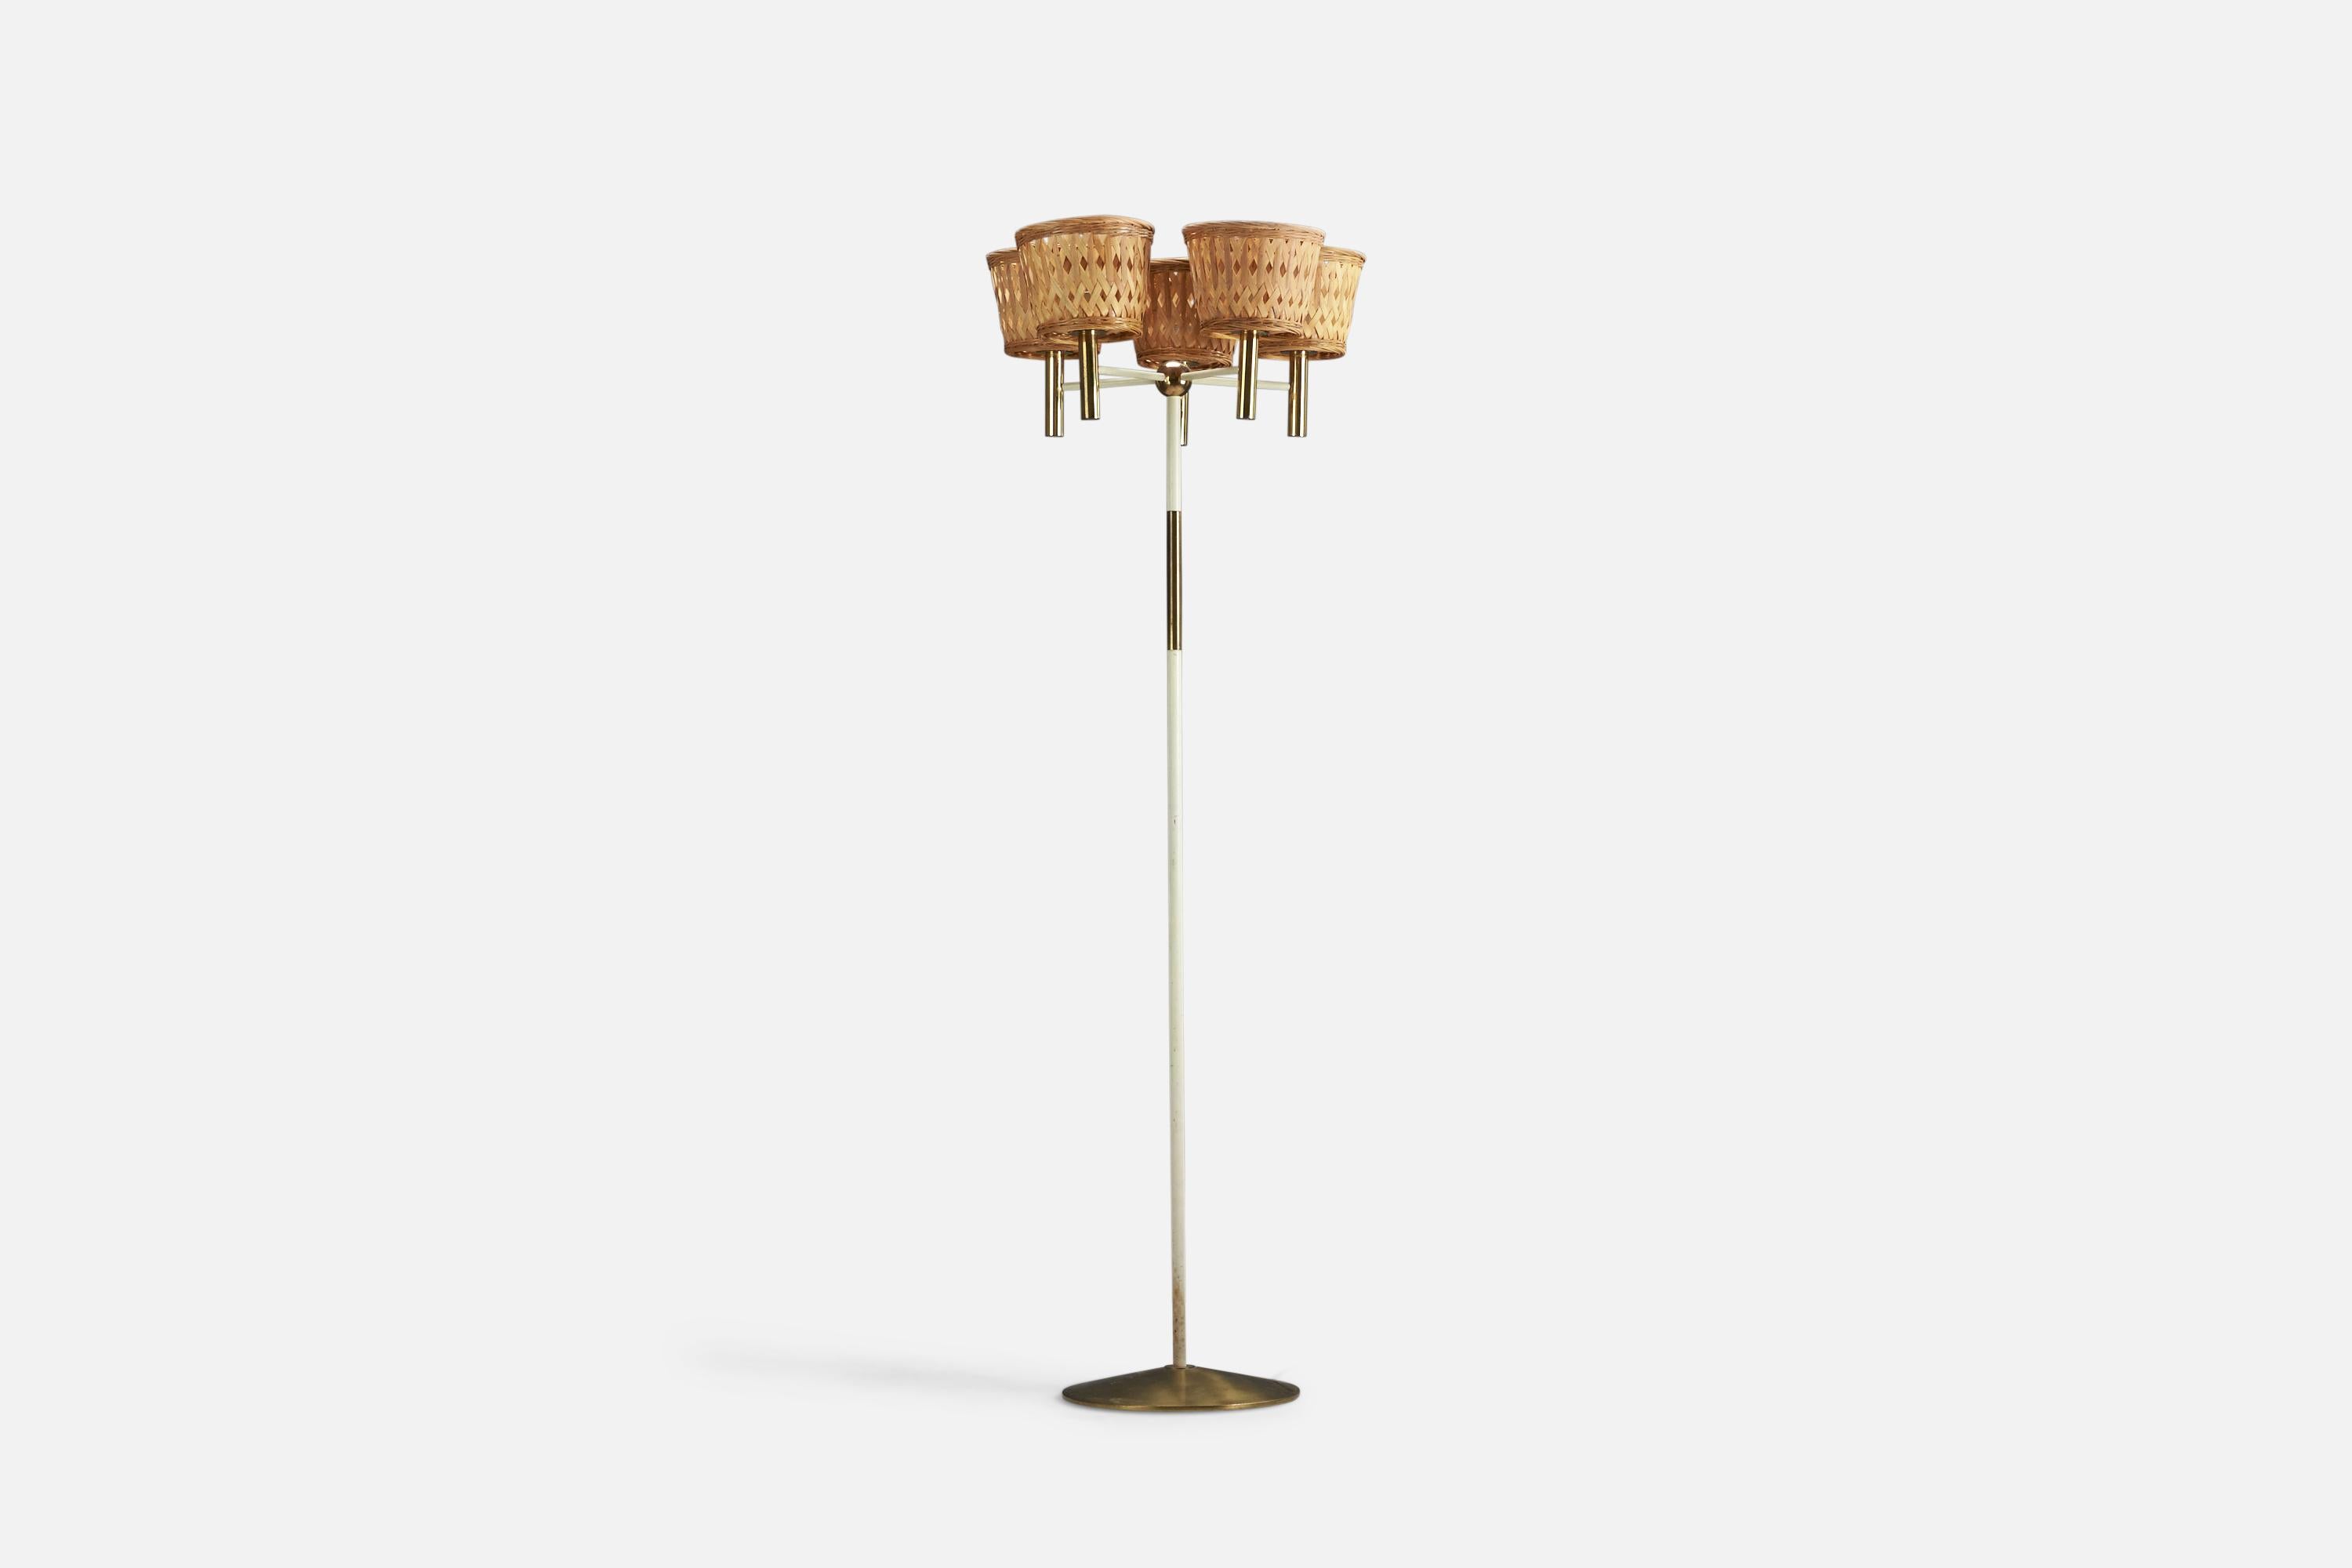 A brass and metal floor lamp designed and produced in Germany, 1950s.

Dimensions stated are of Floor Lamp with Lampshades. 

Sockets take E-14 bulbs.

There is no maximum wattage stated on the fixture.